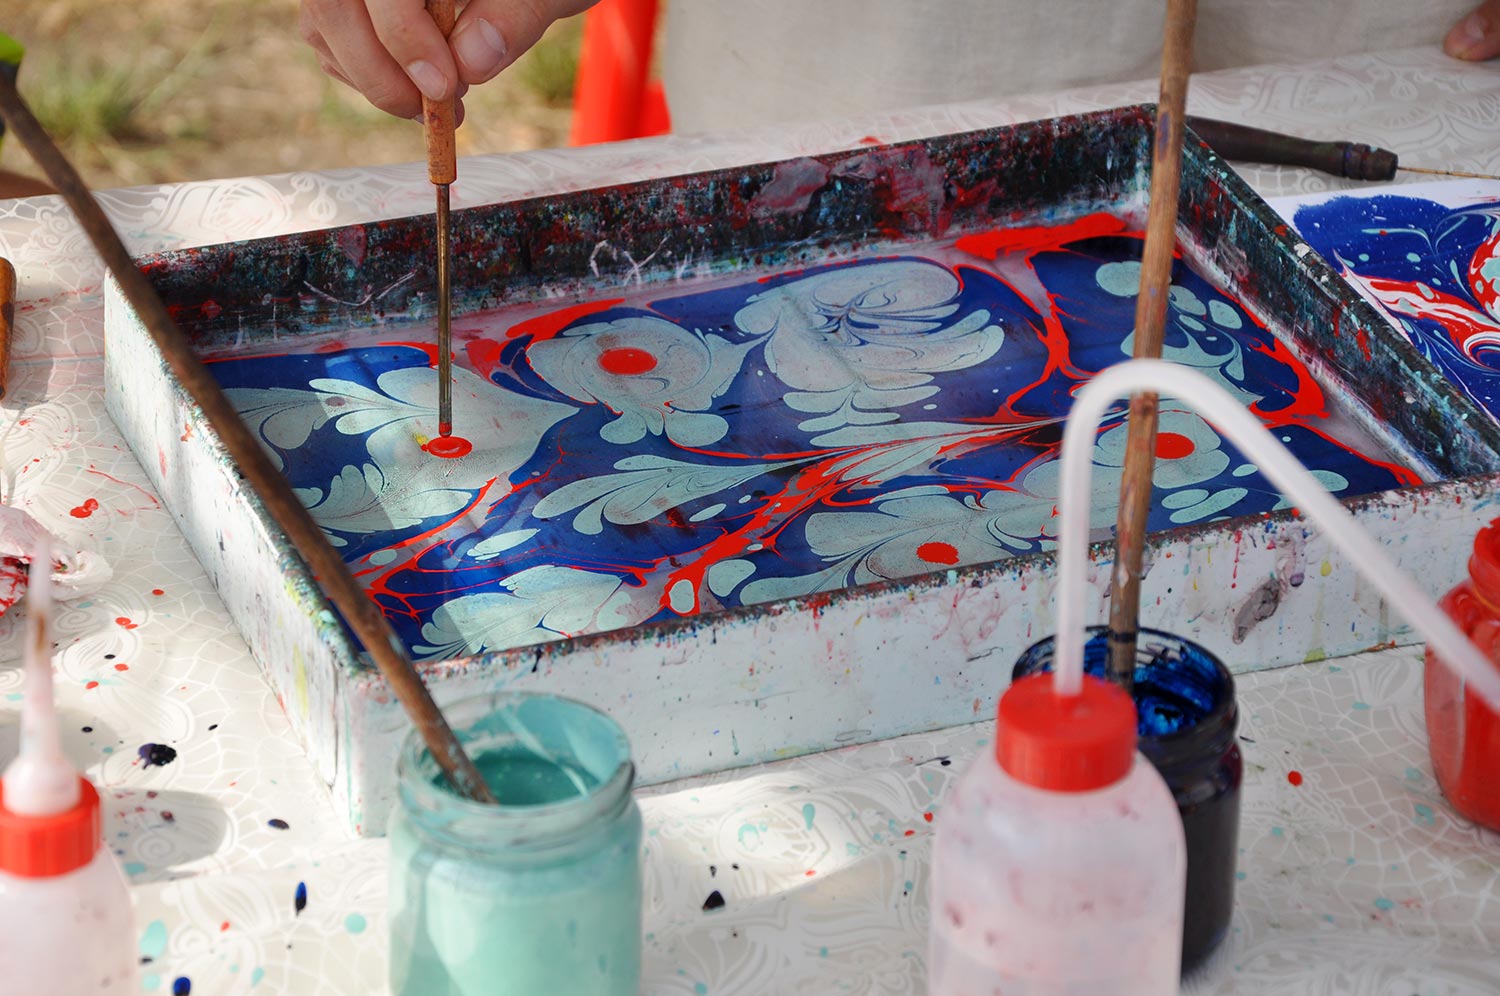 Oil-based inks in a tank of water prepared for marbling